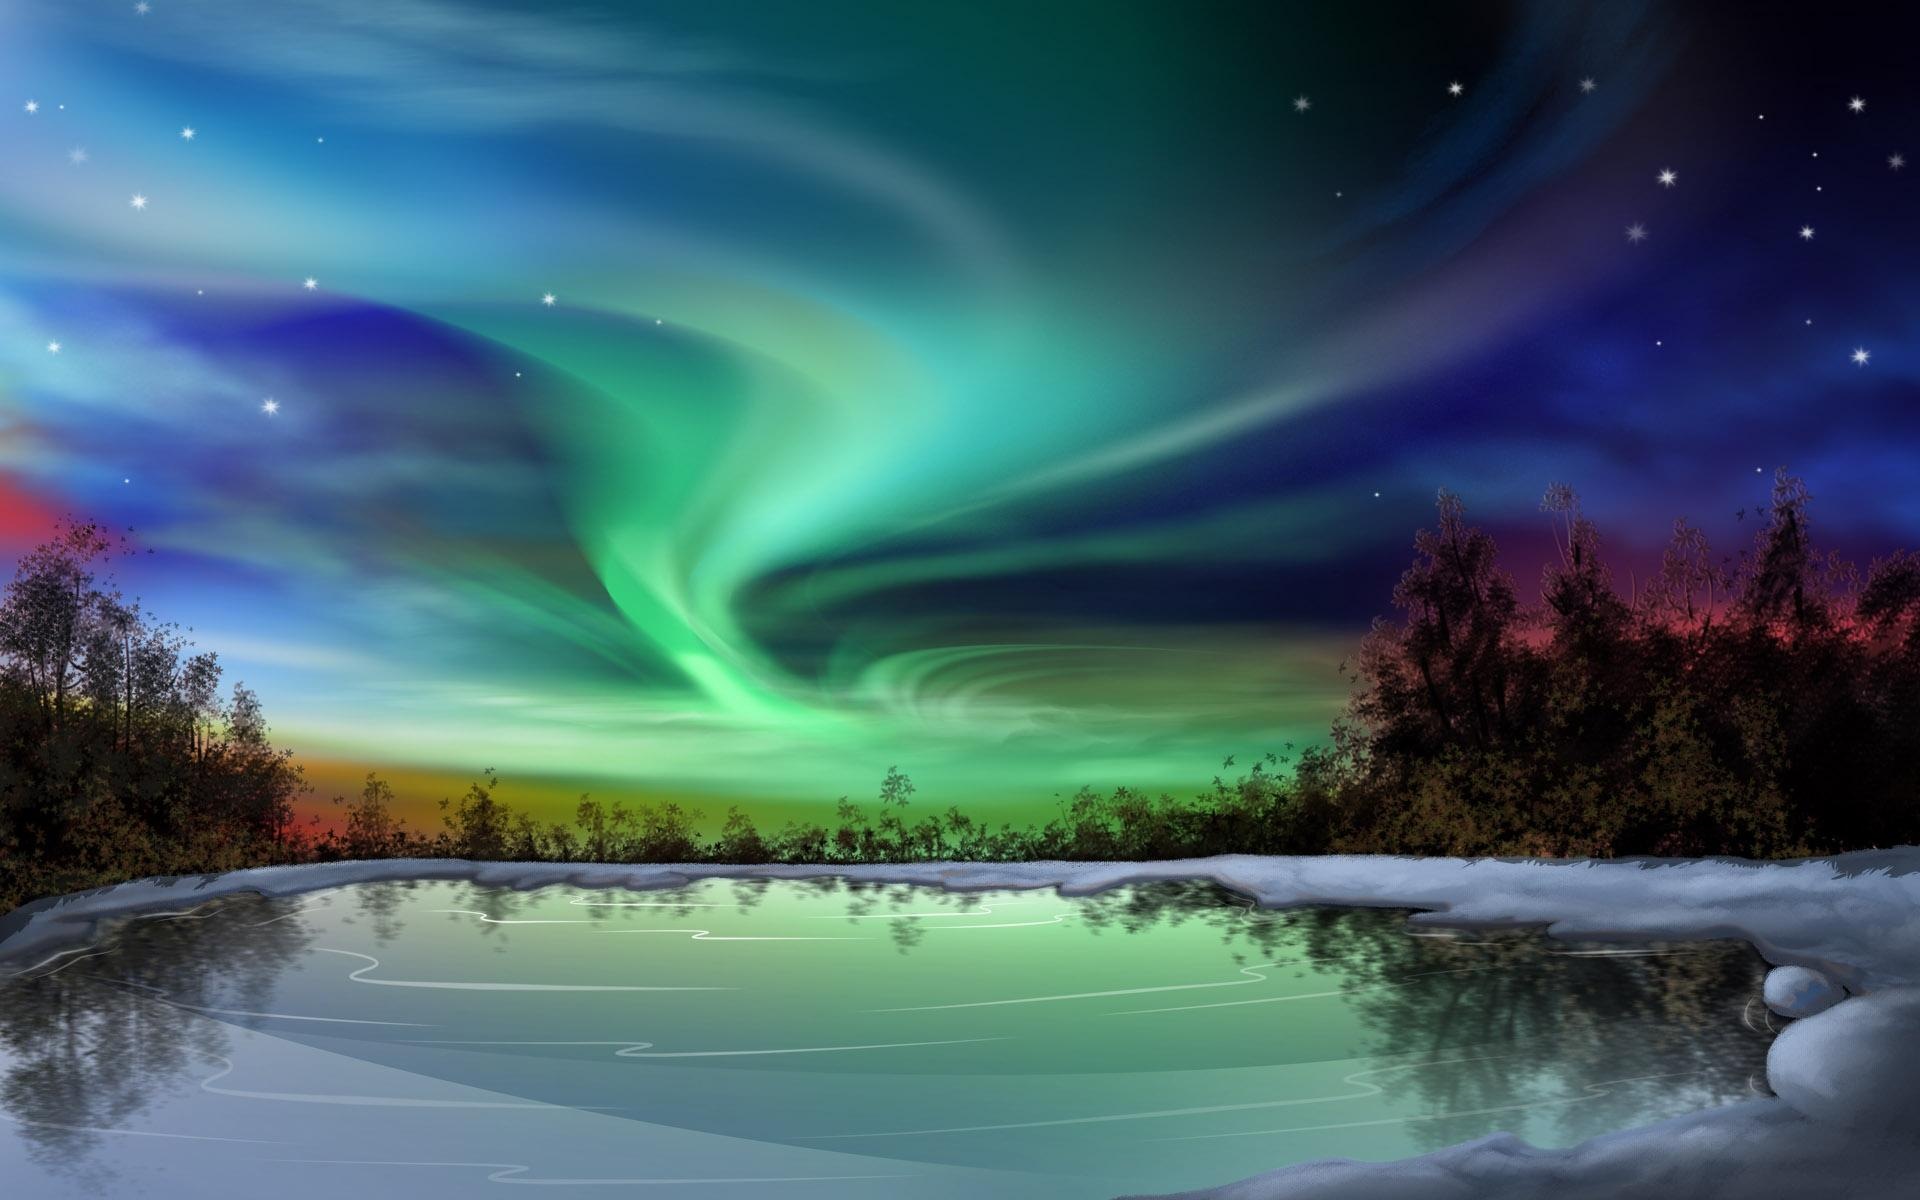 Natural wonders of the Northern Lights HD Wallpaper (2) #25 - 1920x1200